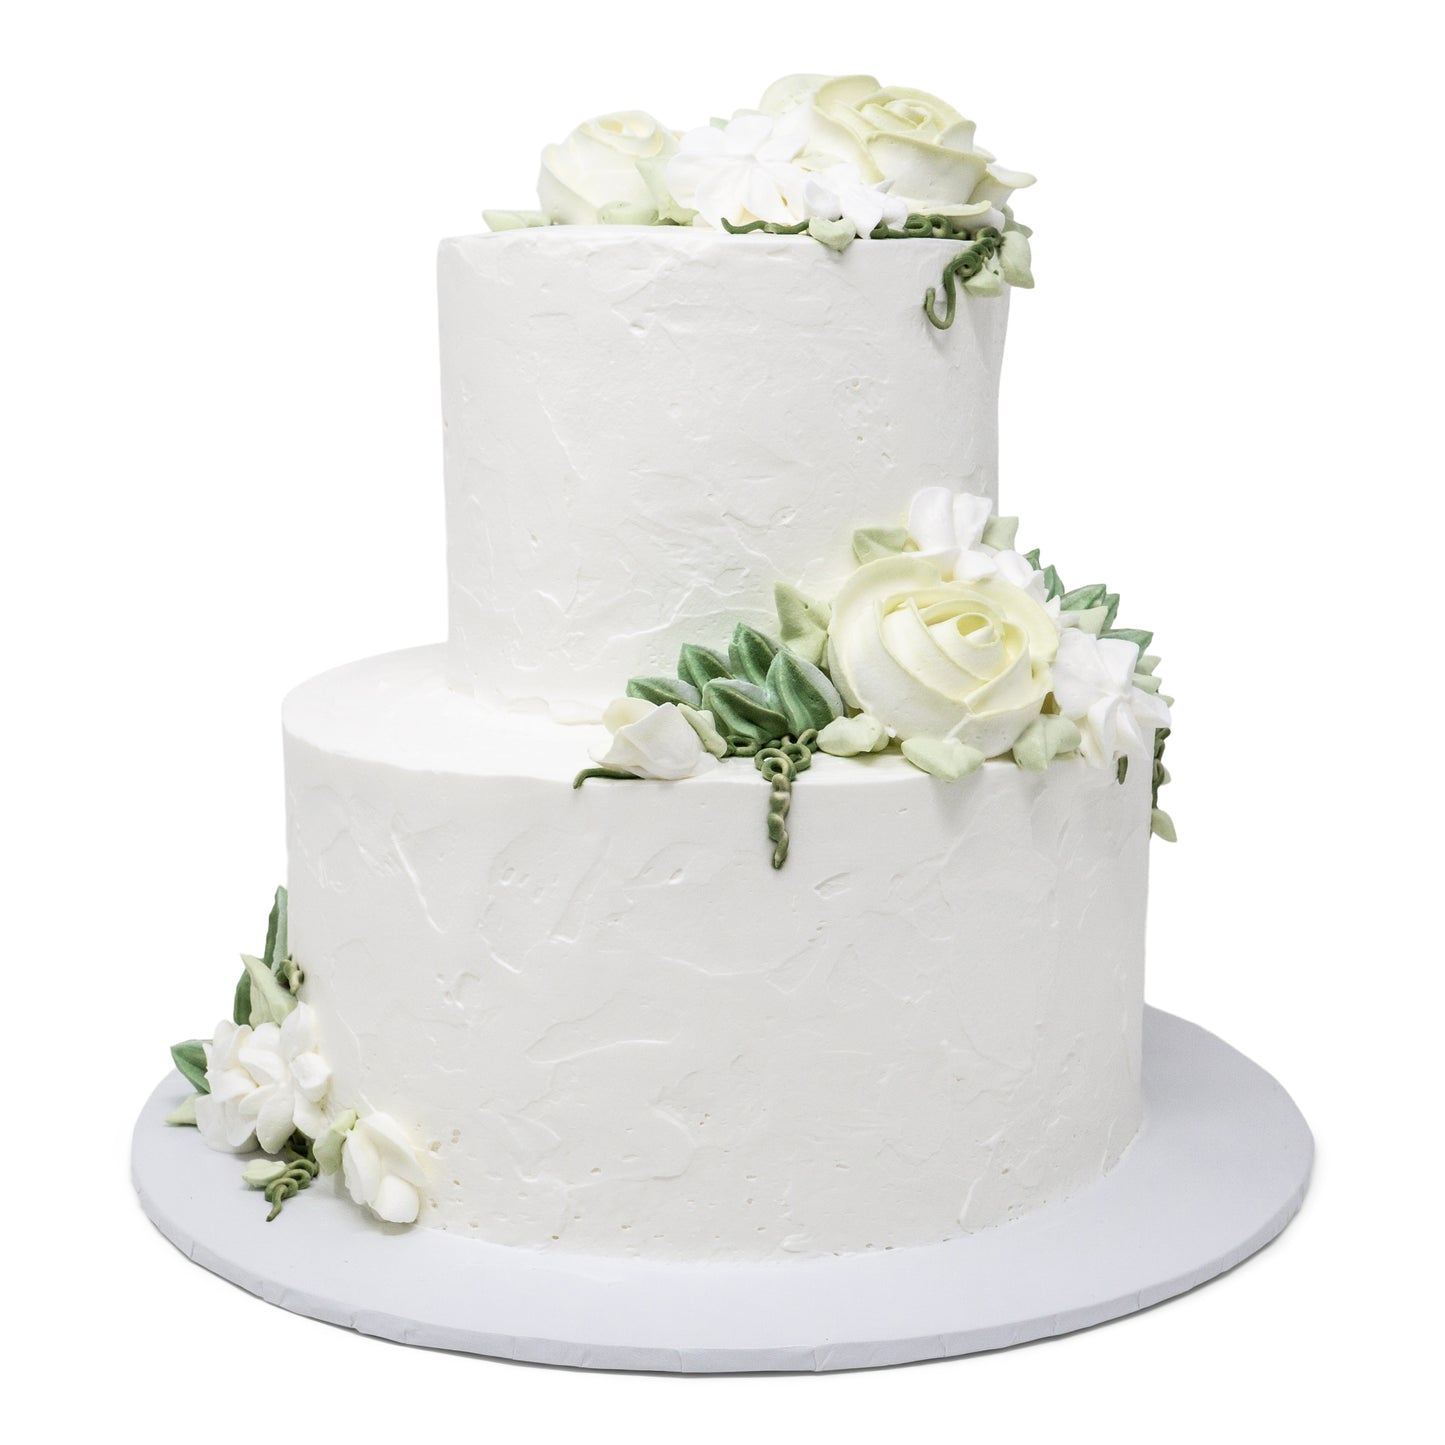 Smooth Texture with Icing Flowers - 2 Tier Vegan Cake